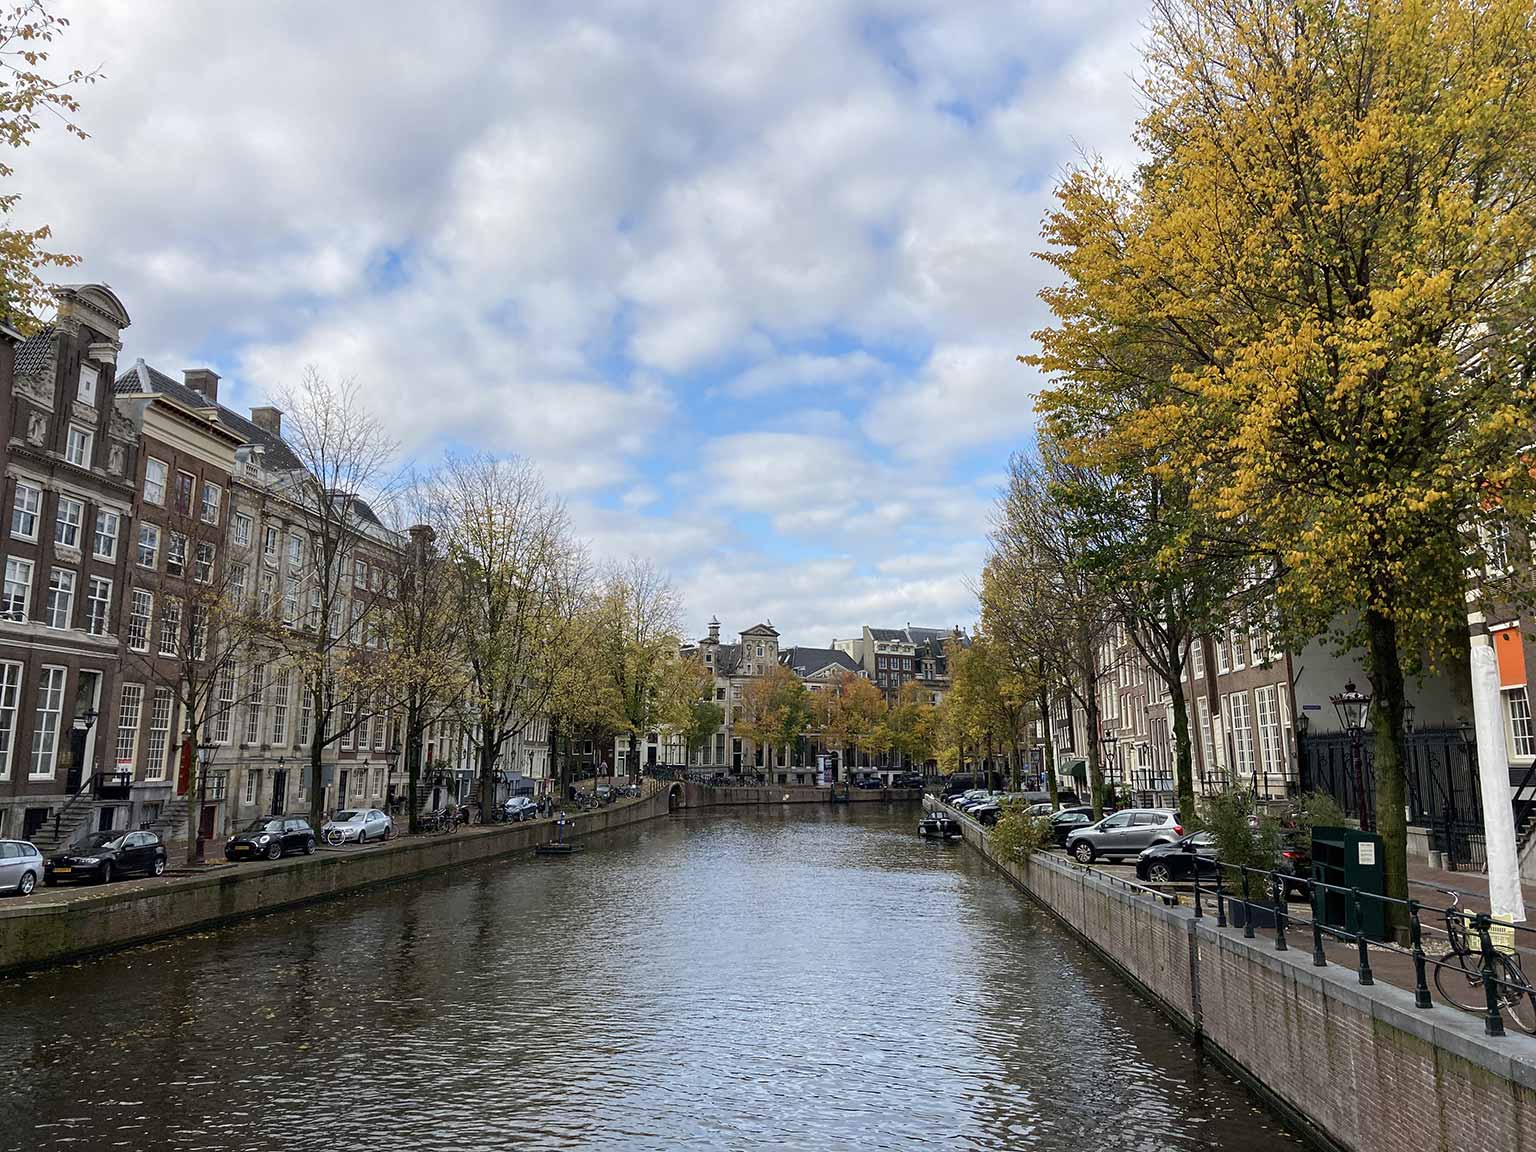 Herengracht, Amsterdam, seen from Koningssluis in the direction of the Leidsegracht